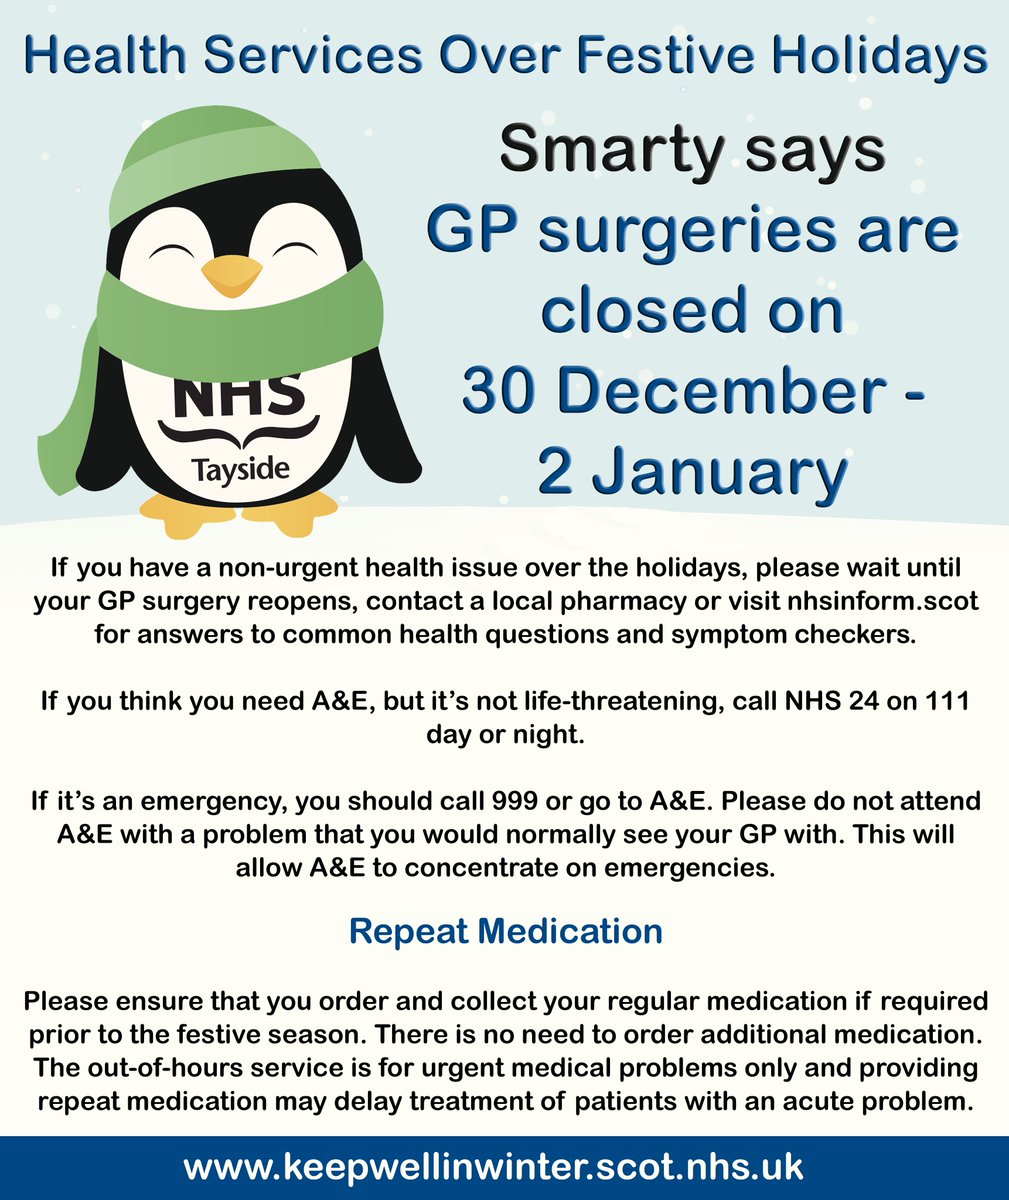 GPs are closed 30 Dec - 2 Jan. Know where to get the right care in the right place this festive season. Find out more at keepwellinwinter.scot.nhs.uk Festive opening times for community pharmacies >> tinyurl.com/fm95nxkv